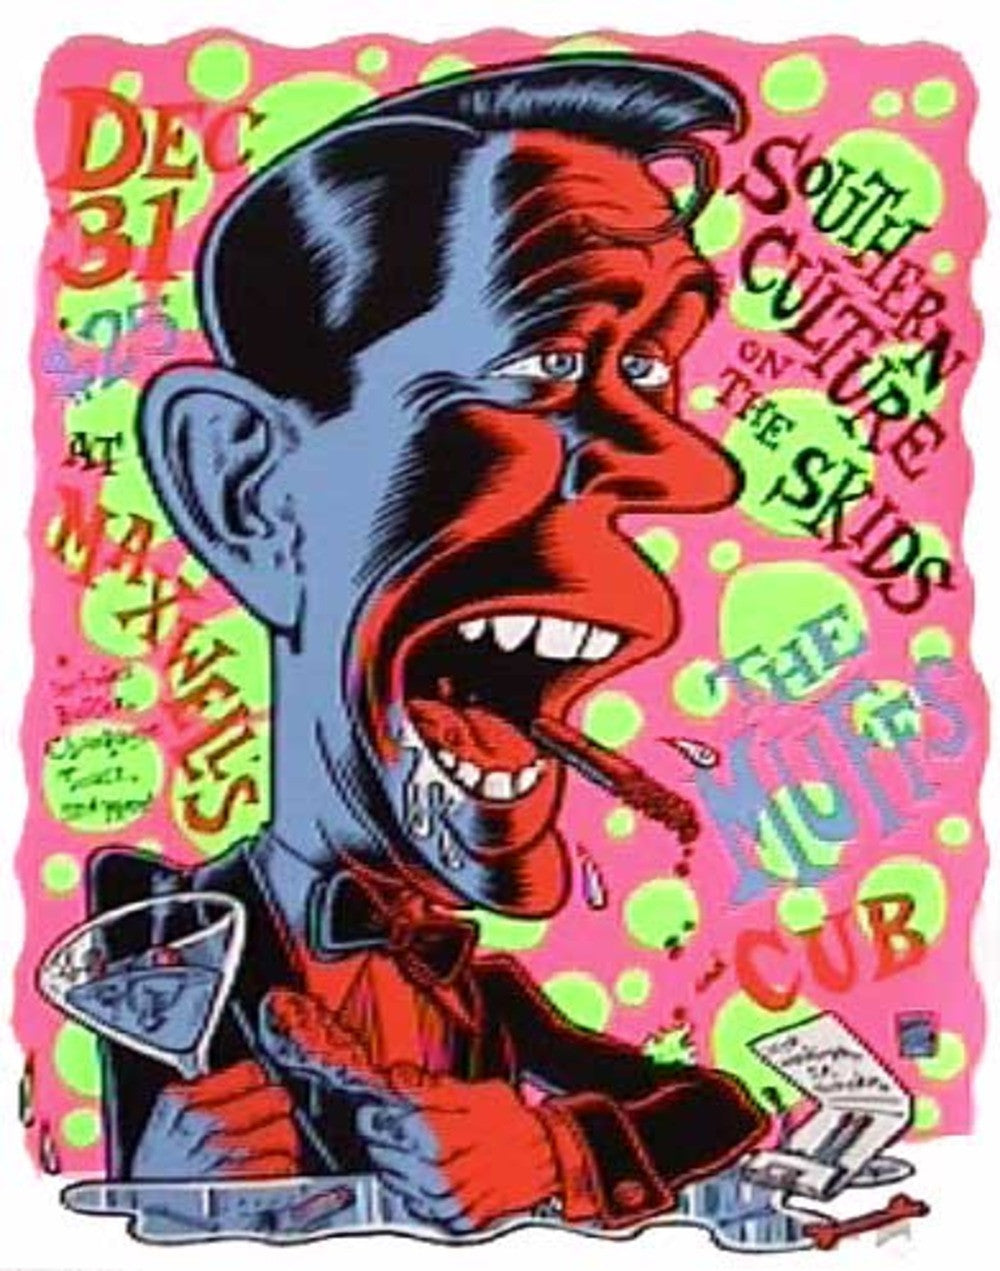 Ward Sutton - 1995 - Southern Culture on the Skids Concert Poster